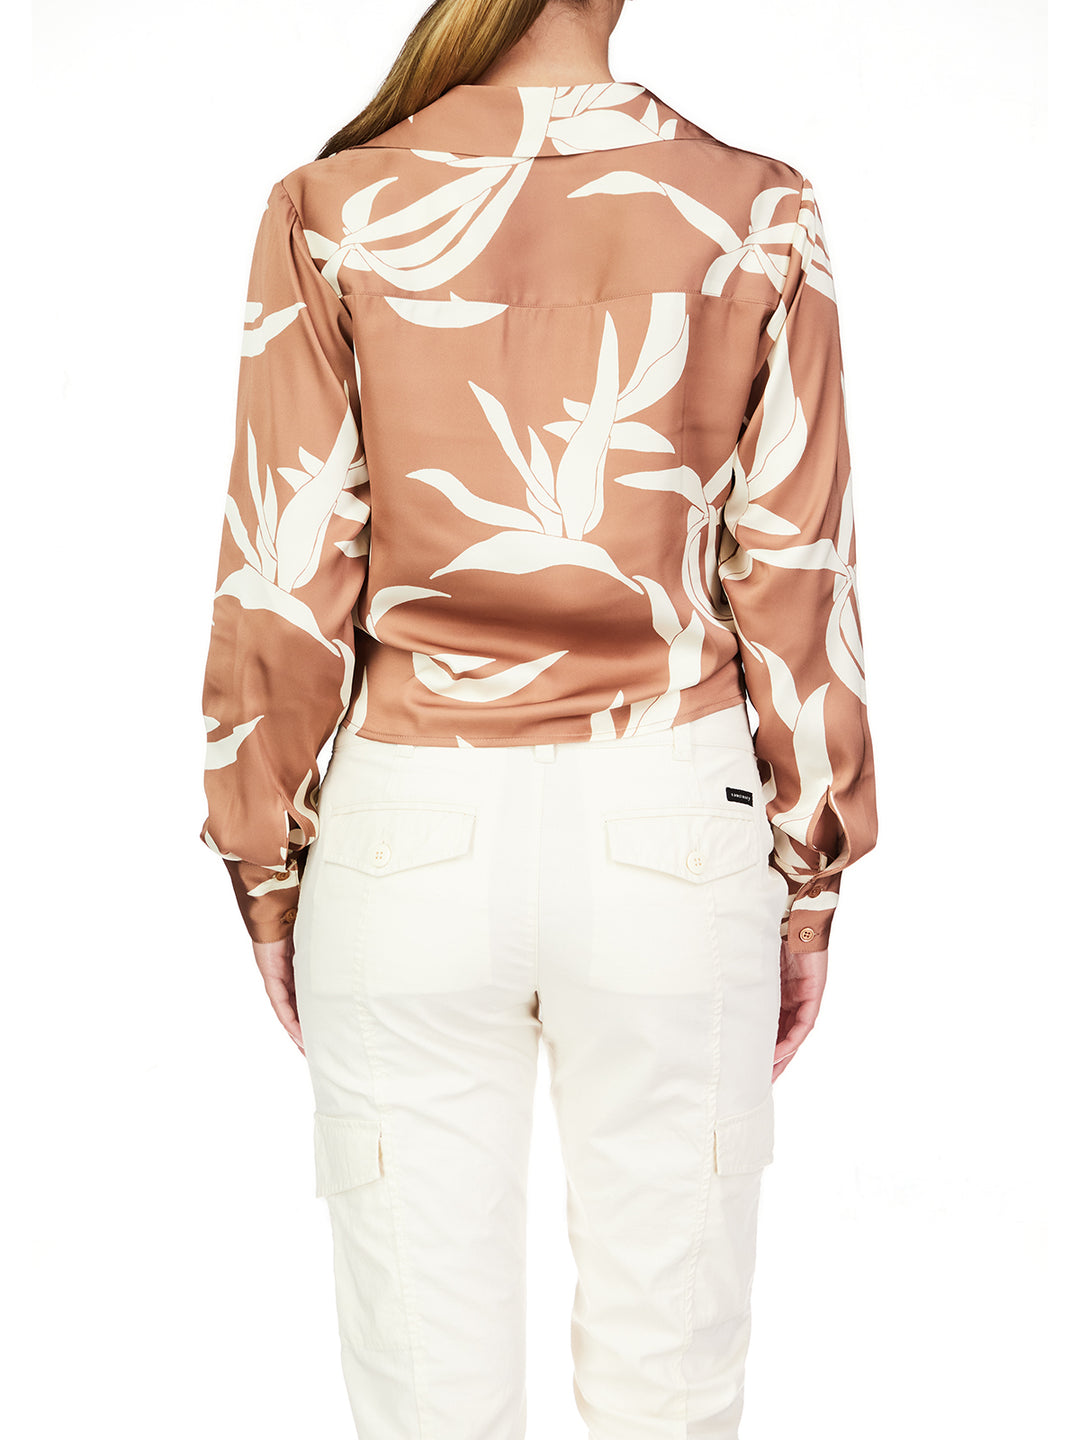 LOVER TIE SHIRT-FIRST BLOOM - Kingfisher Road - Online Boutique